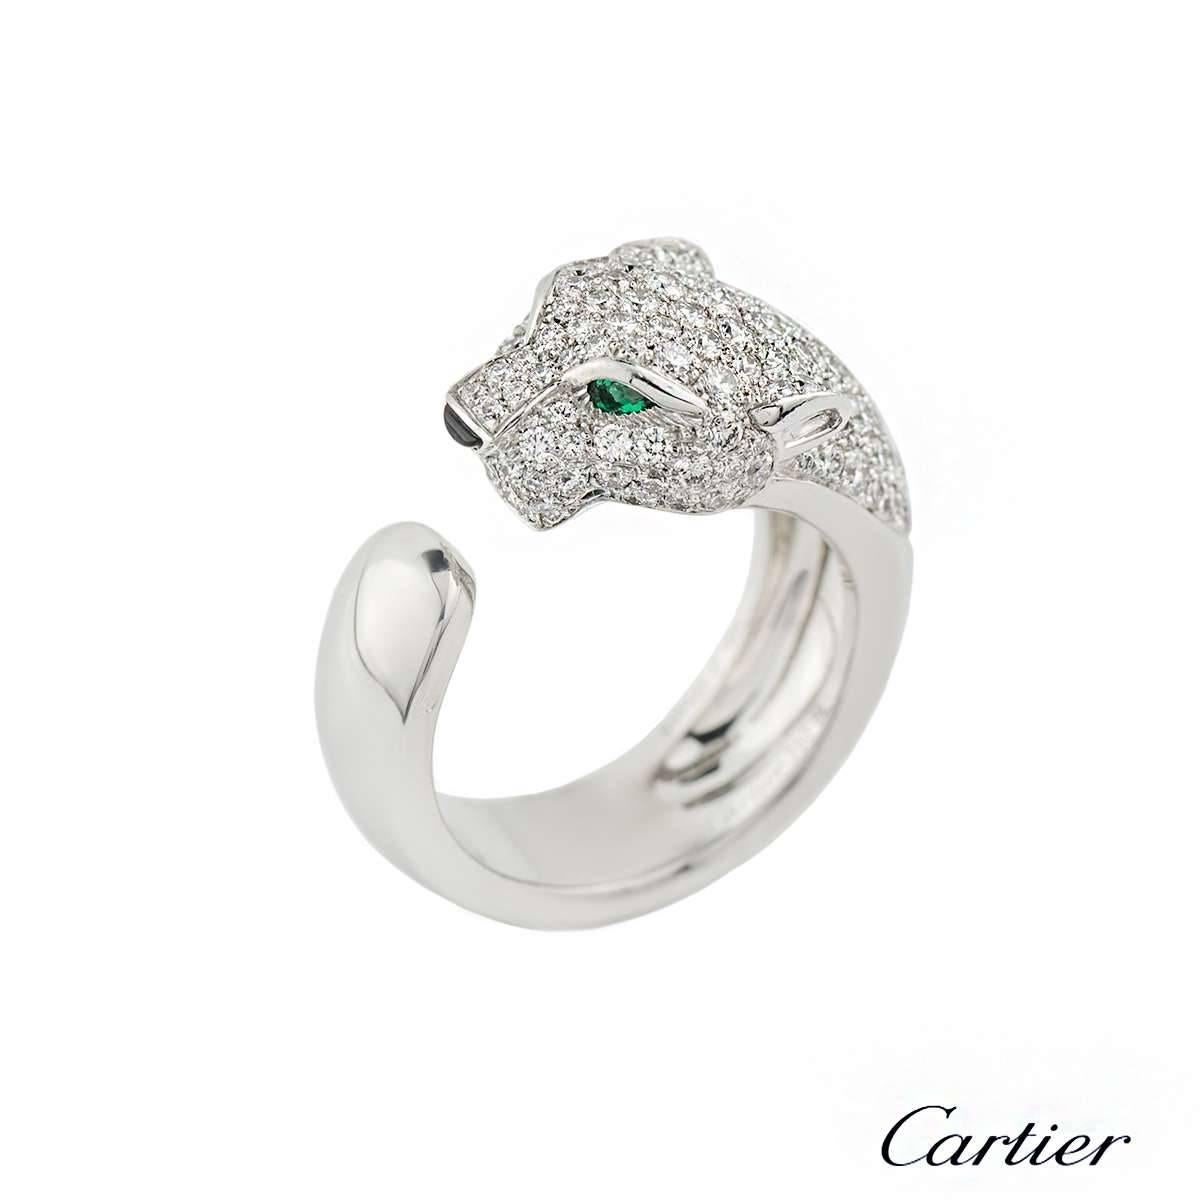 A stunning 18k white gold Cartier diamond, onyx and emerald ring from the Panthere De Cartier collection. The ring is composed of a panthere head motif, pave set with 137 round brilliant cut diamonds totalling 1.15 carats, F+ colour and VS+ in